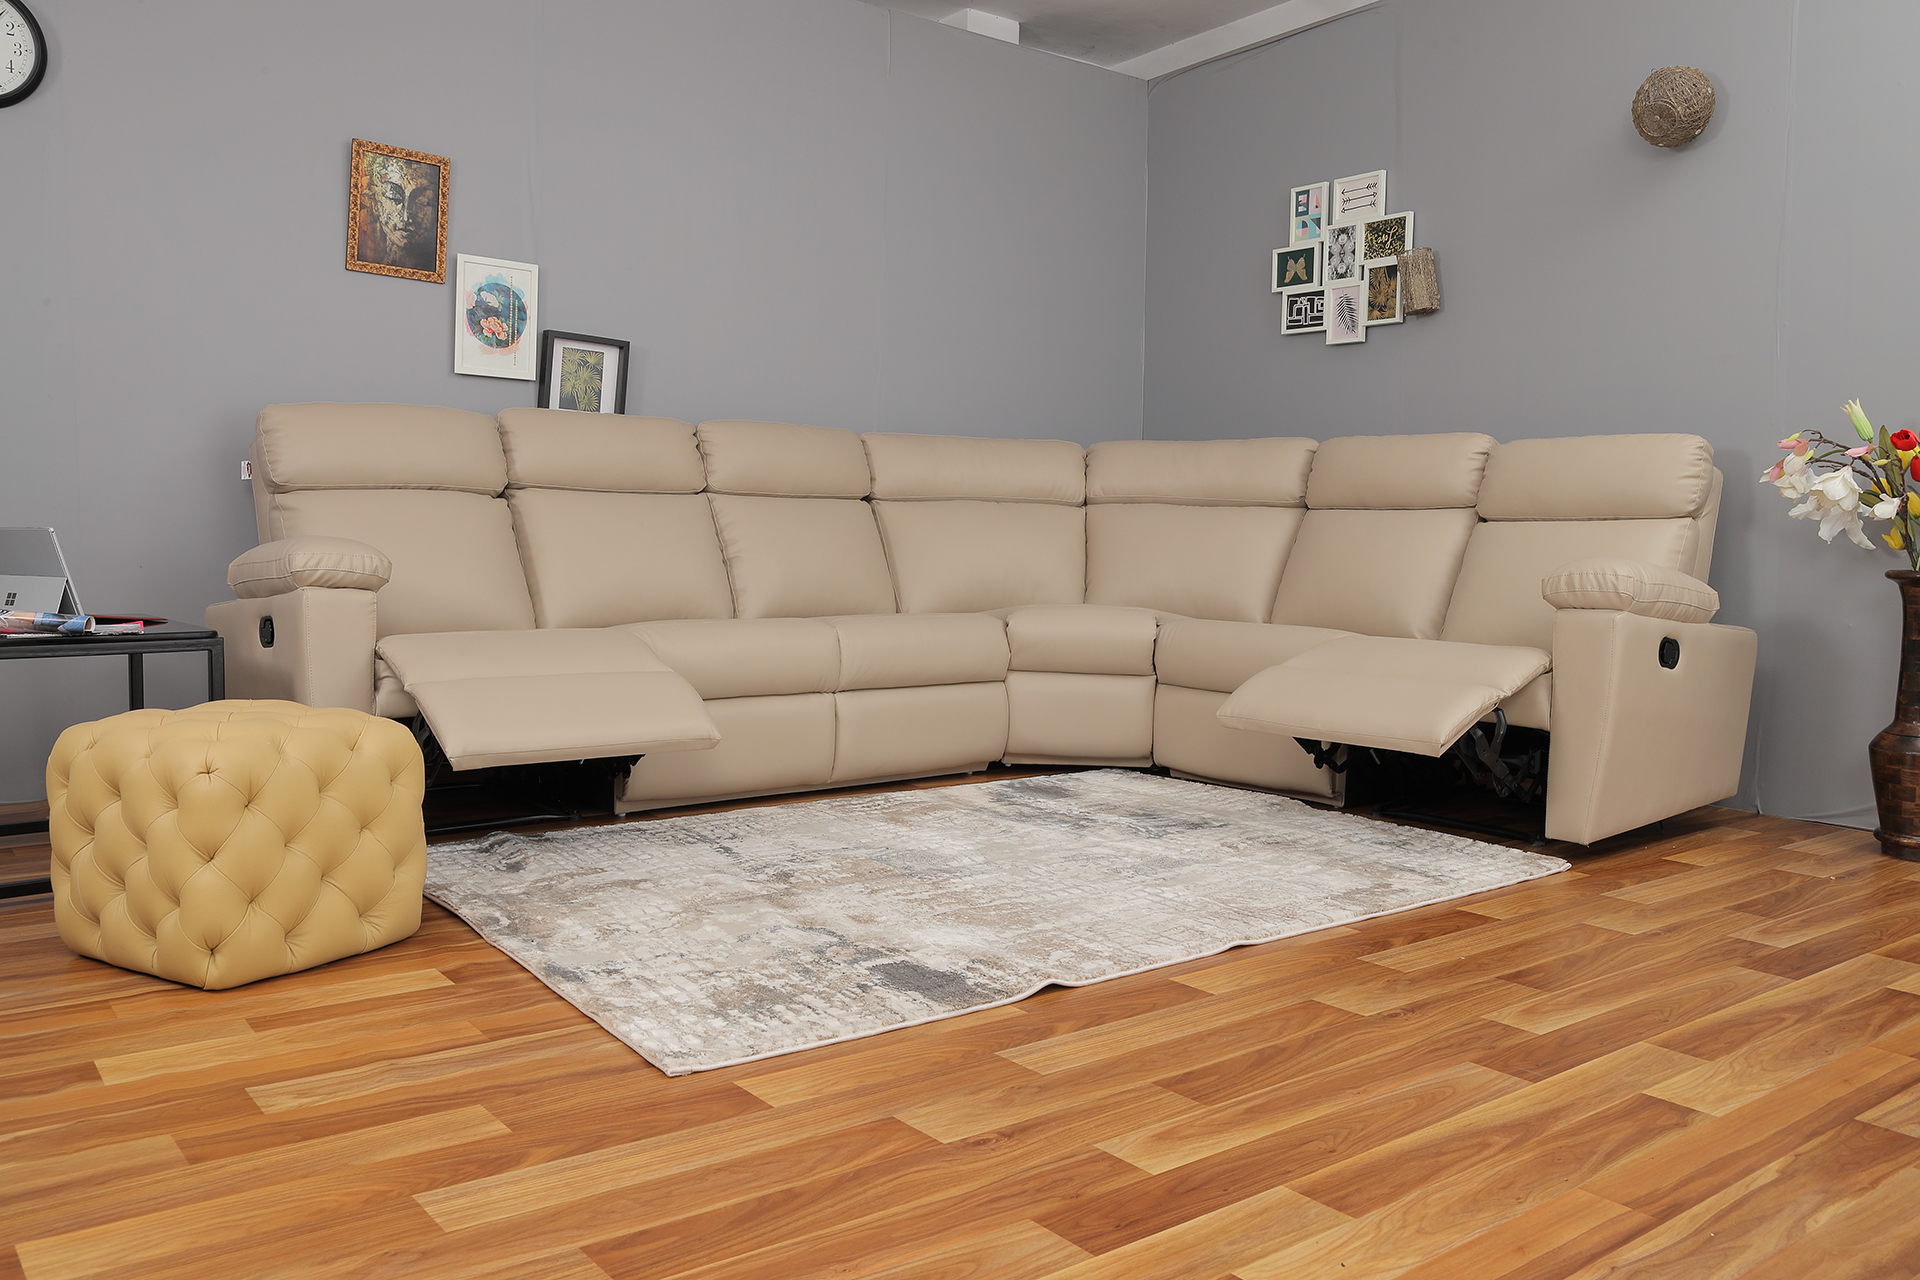 Sofa for sale in Hyderabad